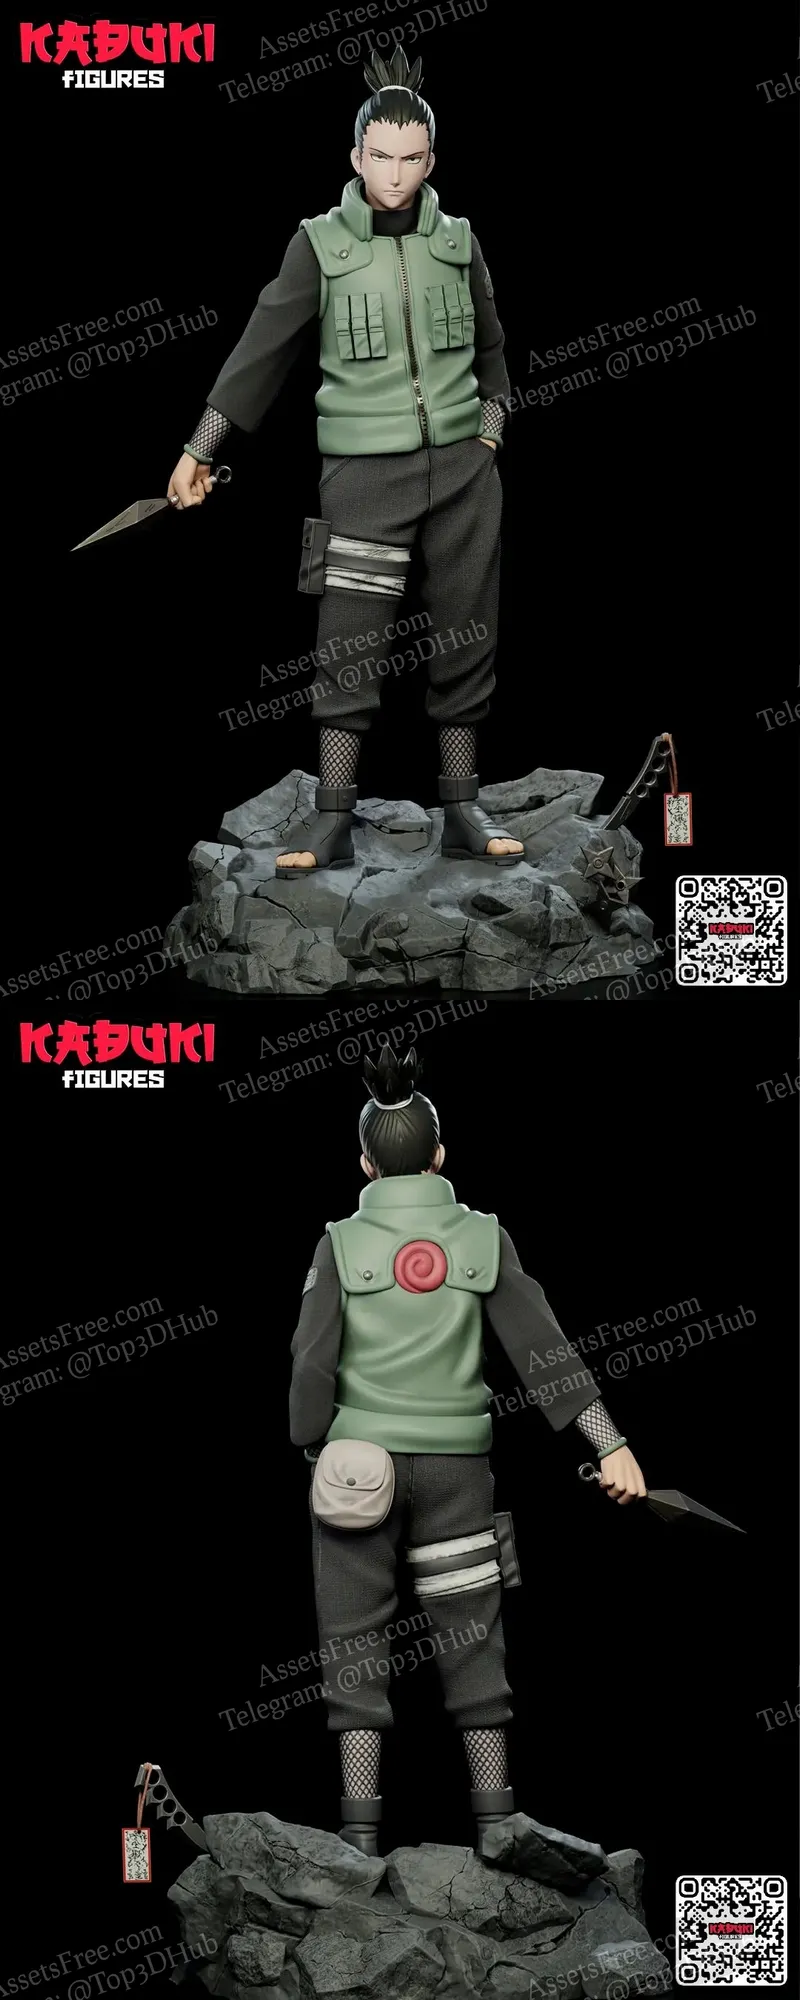 Channel Your Inner Genius: 3D Print Your Own Shikamaru